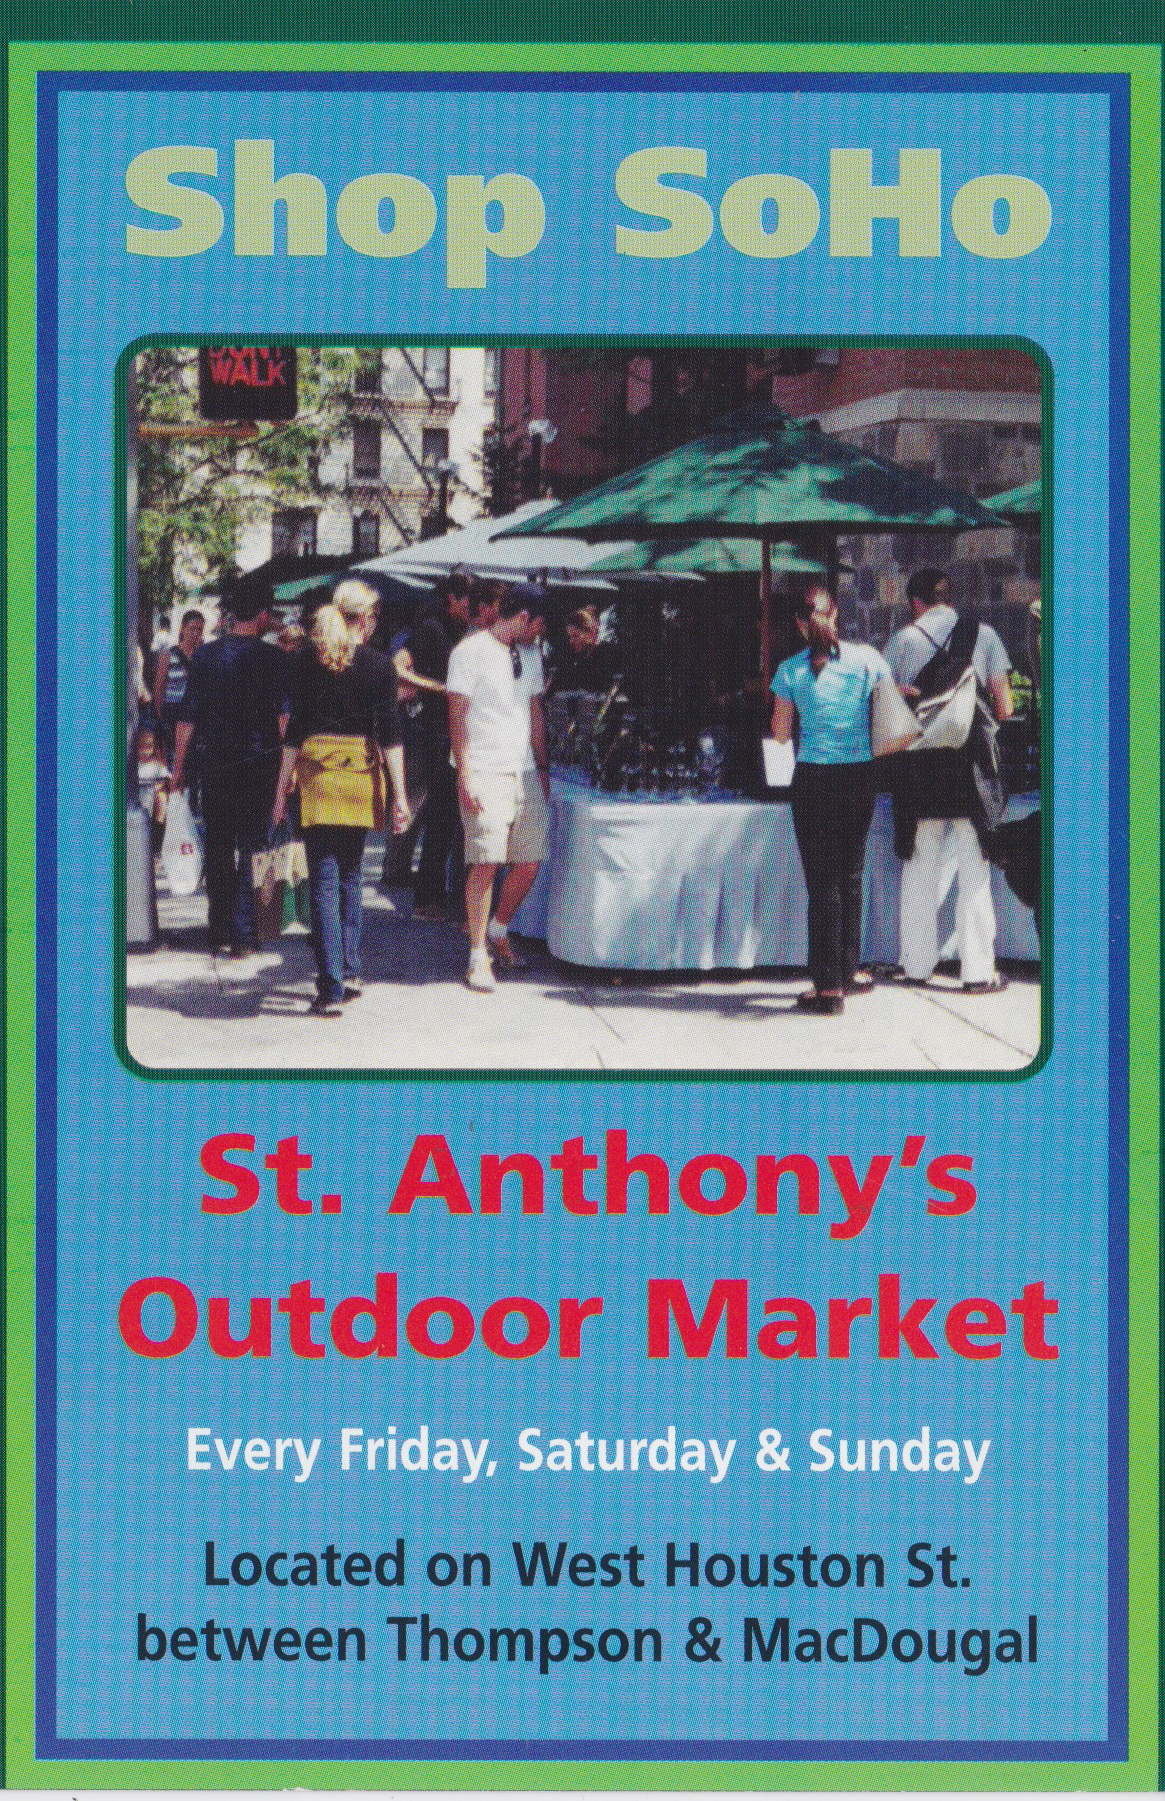 St. Anthony’s Outdoor Market Postcard